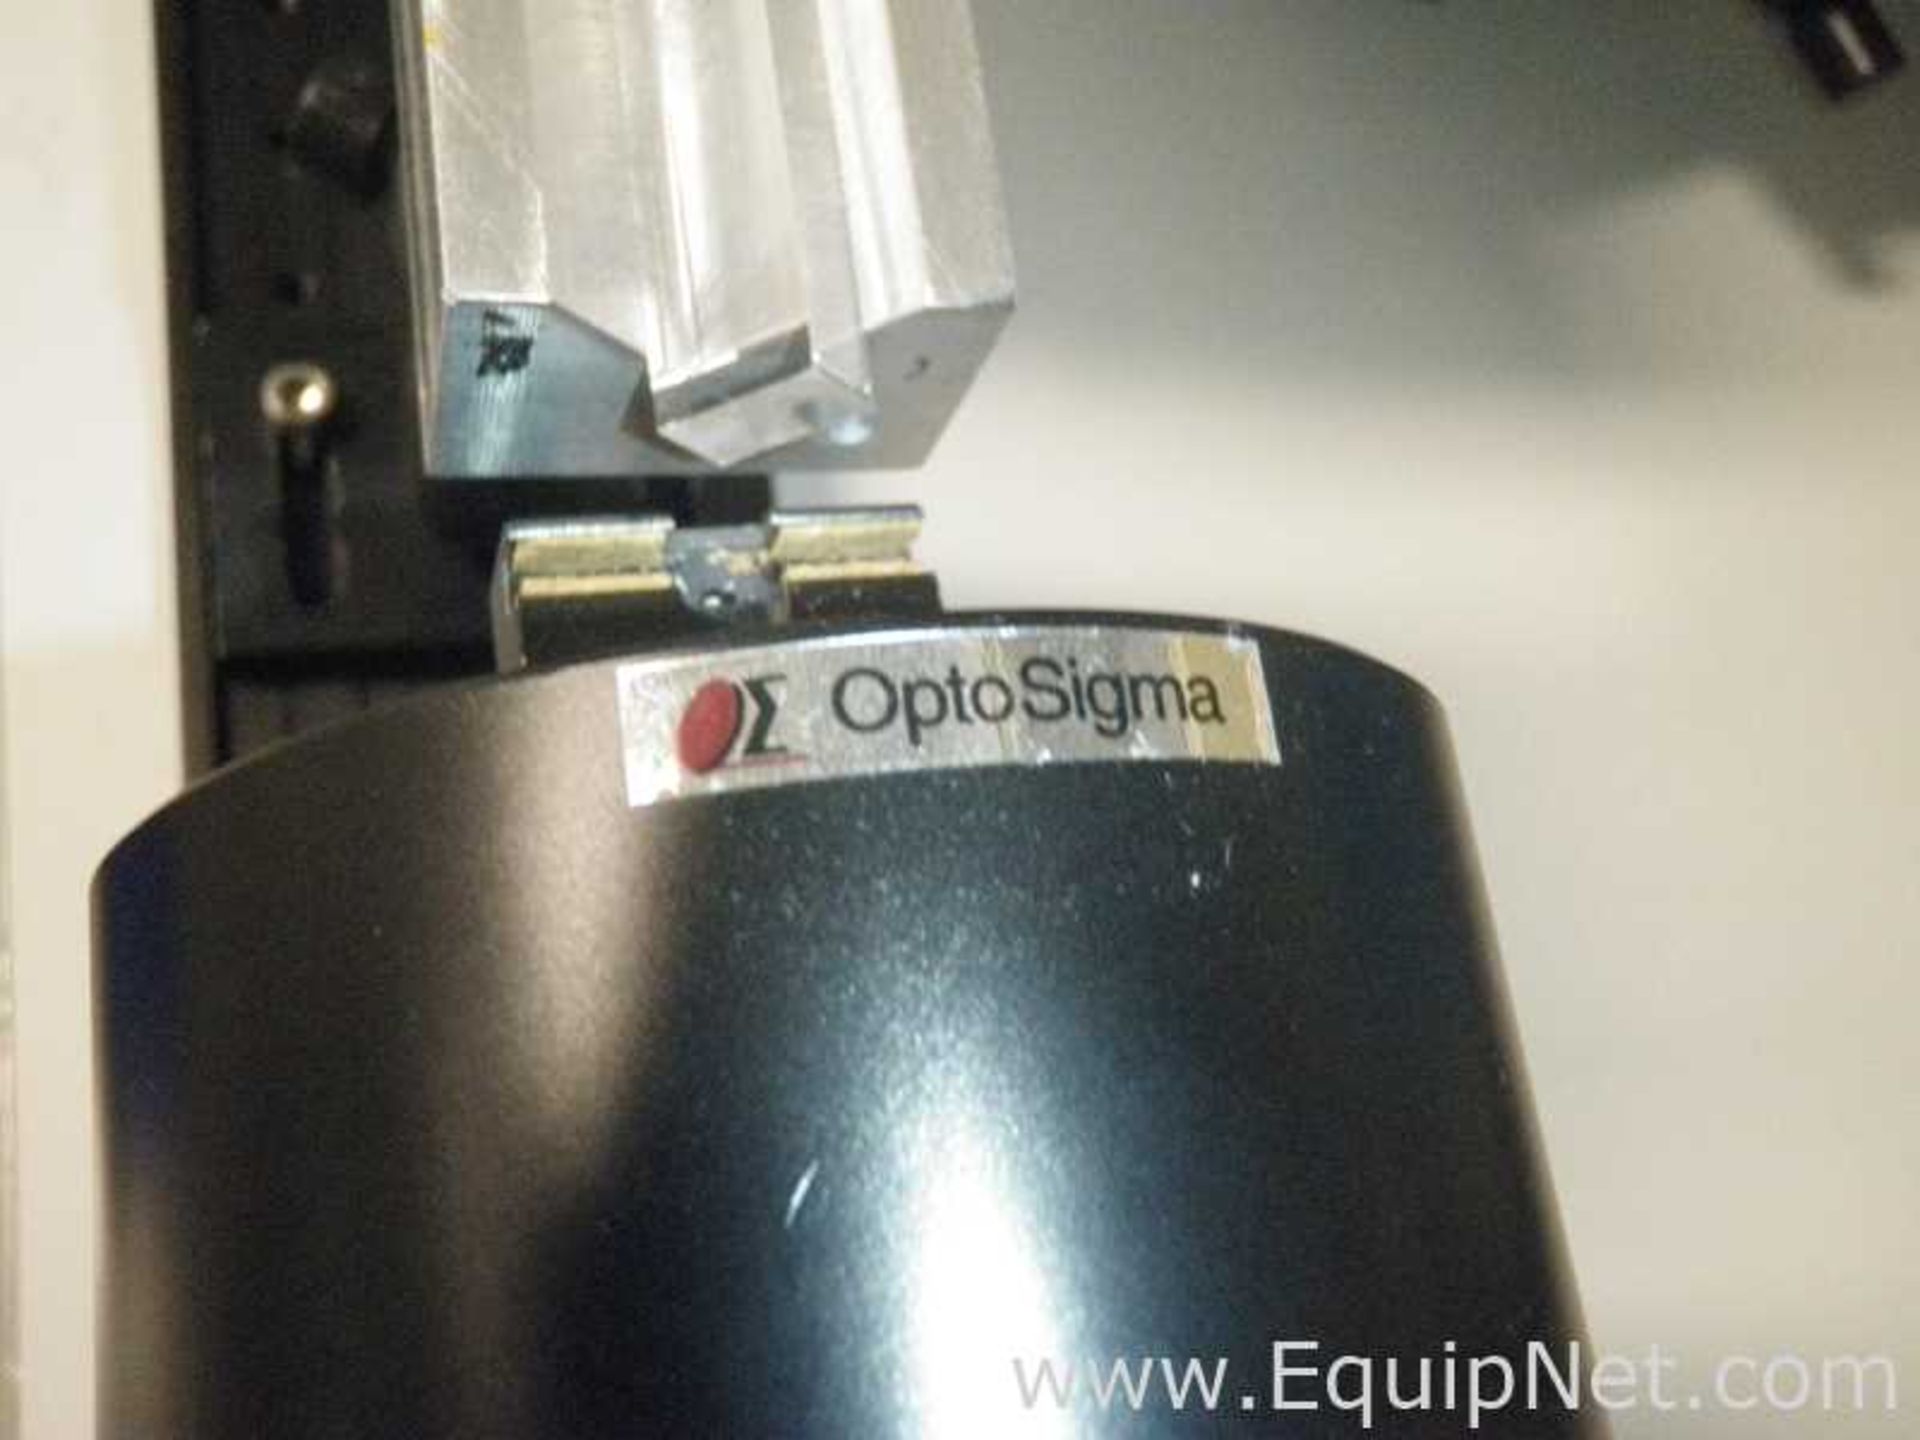 OptioSigma Hi Light Flux Tester Bench Top Lab Electronic Testing and Measurement Equipment - Image 5 of 8